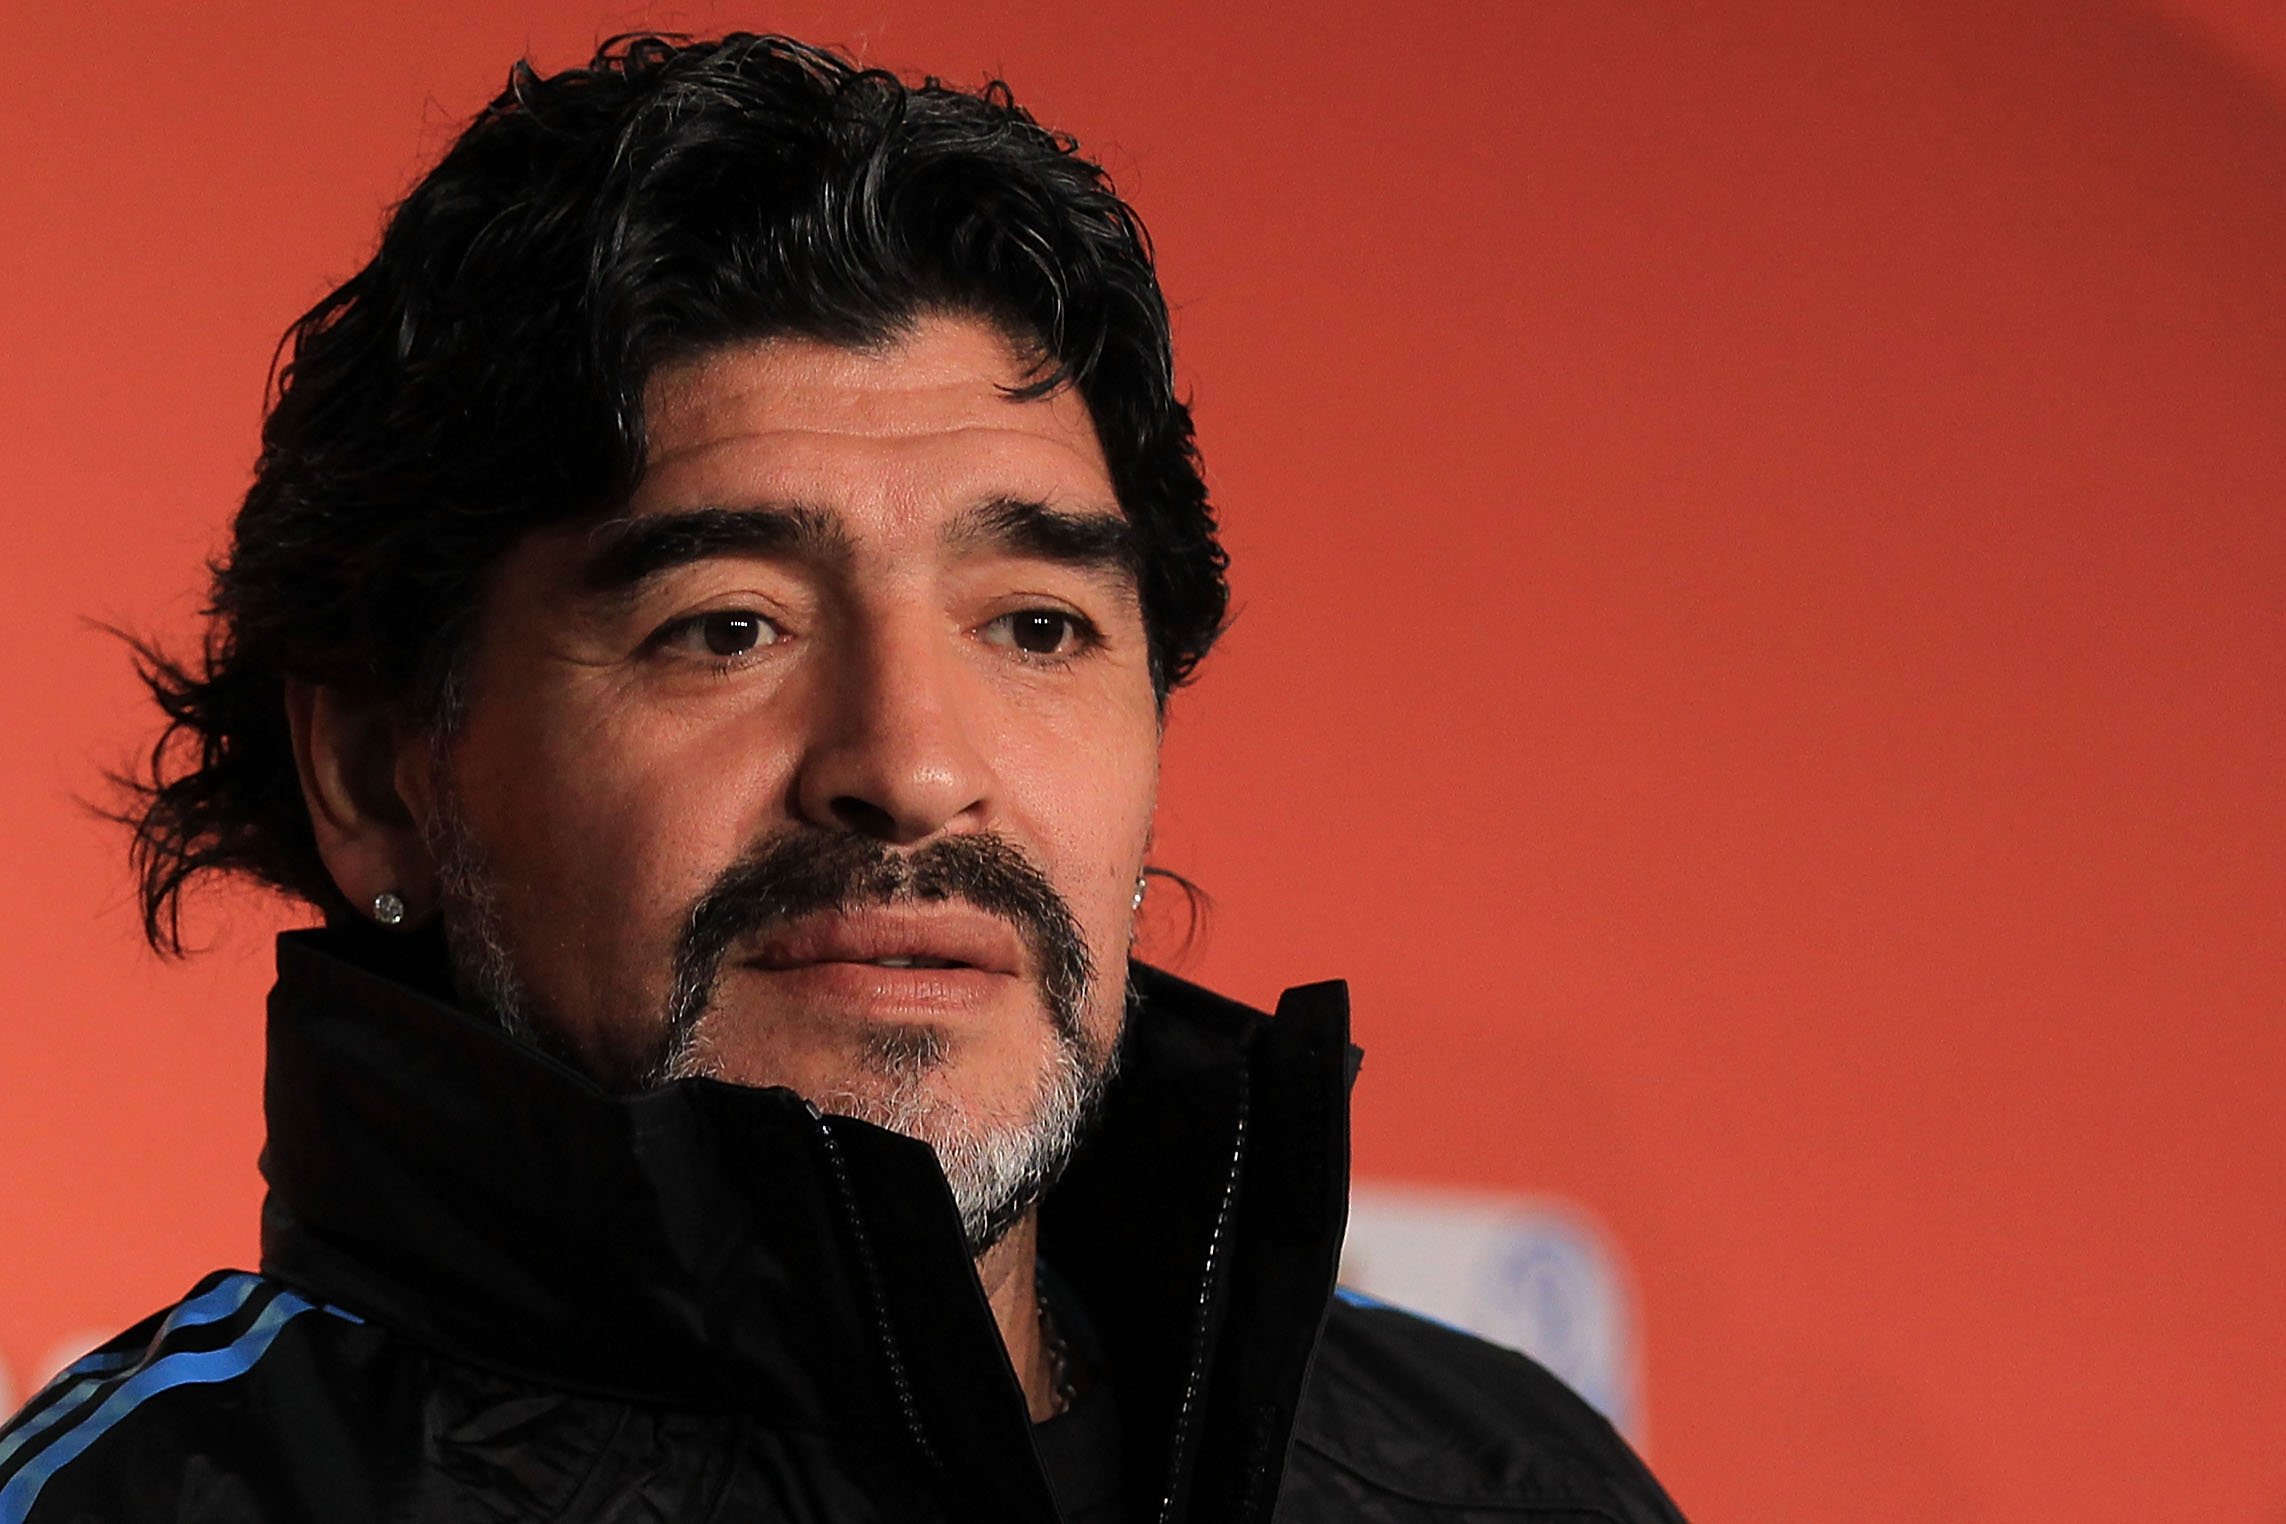 Diego Maradona speaks to the media during a press conference at Green Point Arena on July 2, 2010, in Cape Town, South Africa | Photo: Getty Images